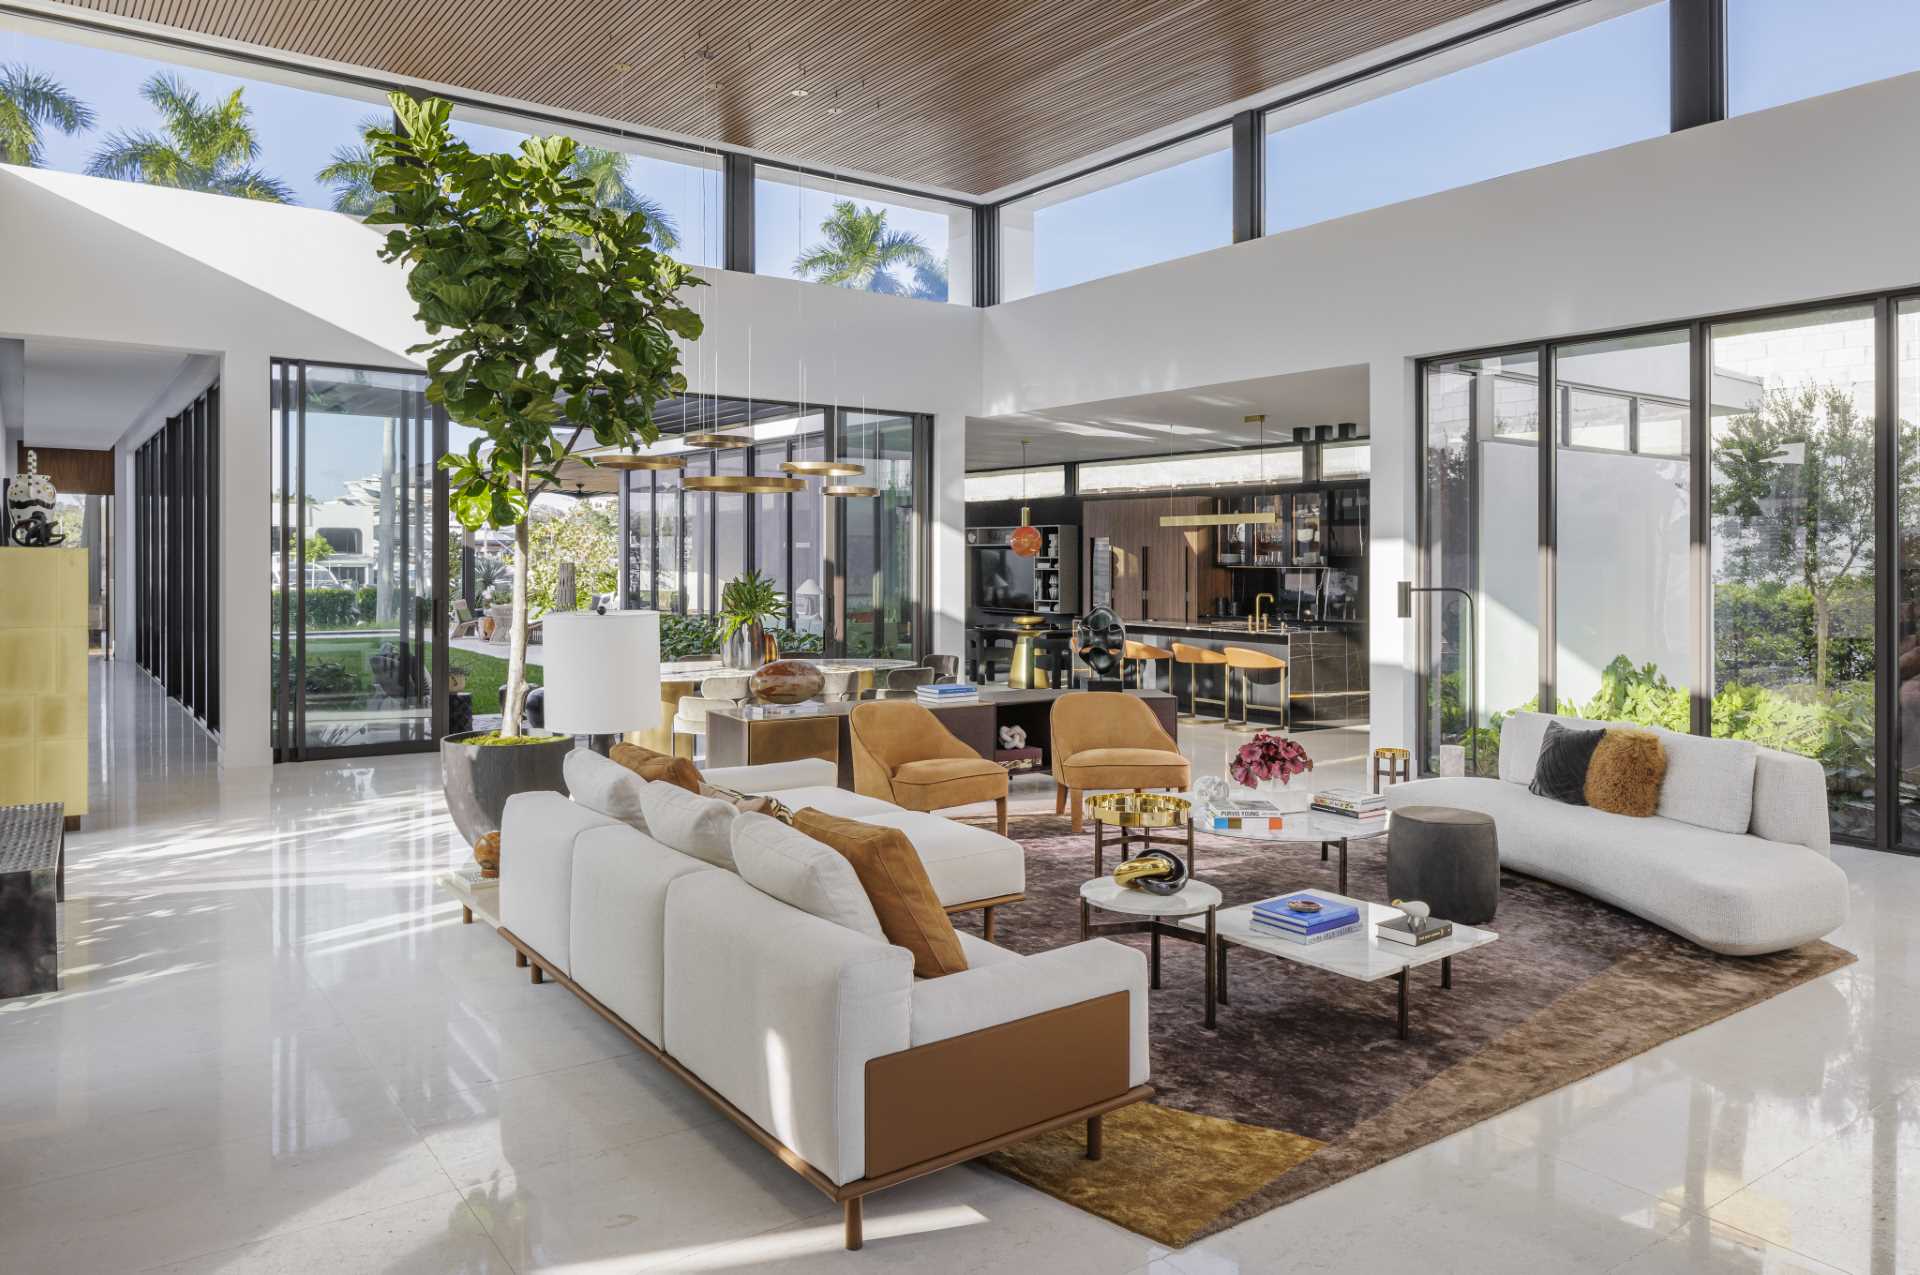 In the living room, dining room, and kitchen, there are elevated ceilings and clerestory windows that have been included to enhance the connection with nature.